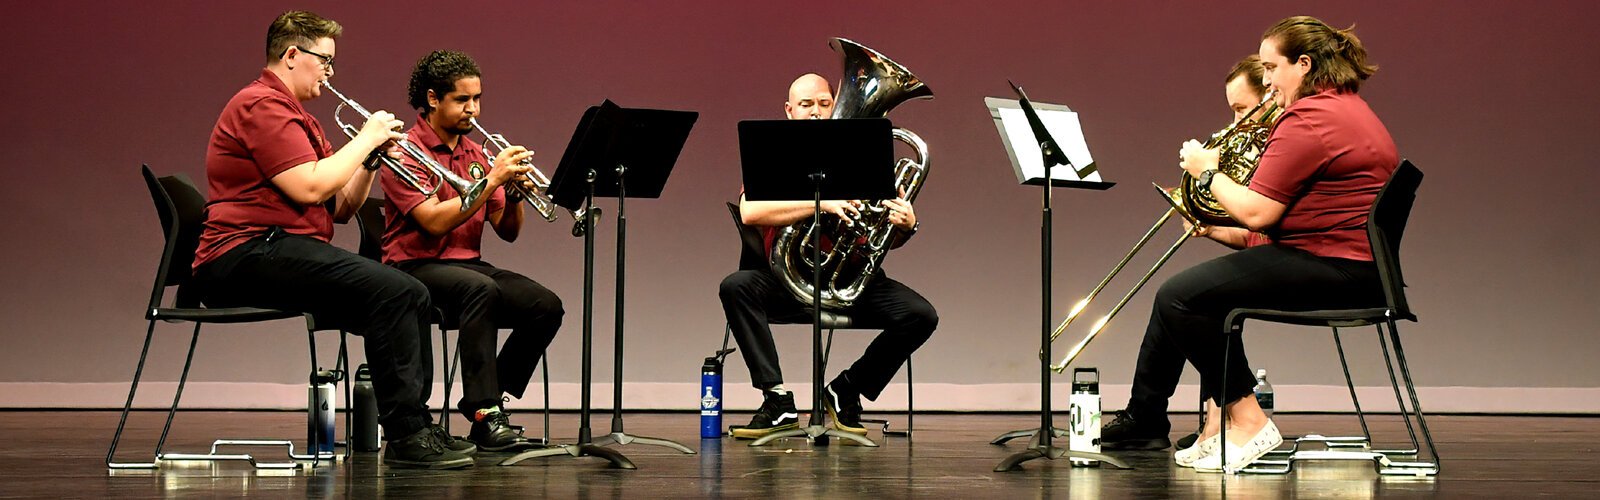 Composed of music teachers from the Tampa Bay area, a small ensemble of the Tampa Brass Band demonstrates their mastery of the trumpet, tuba, trombone and French horn.